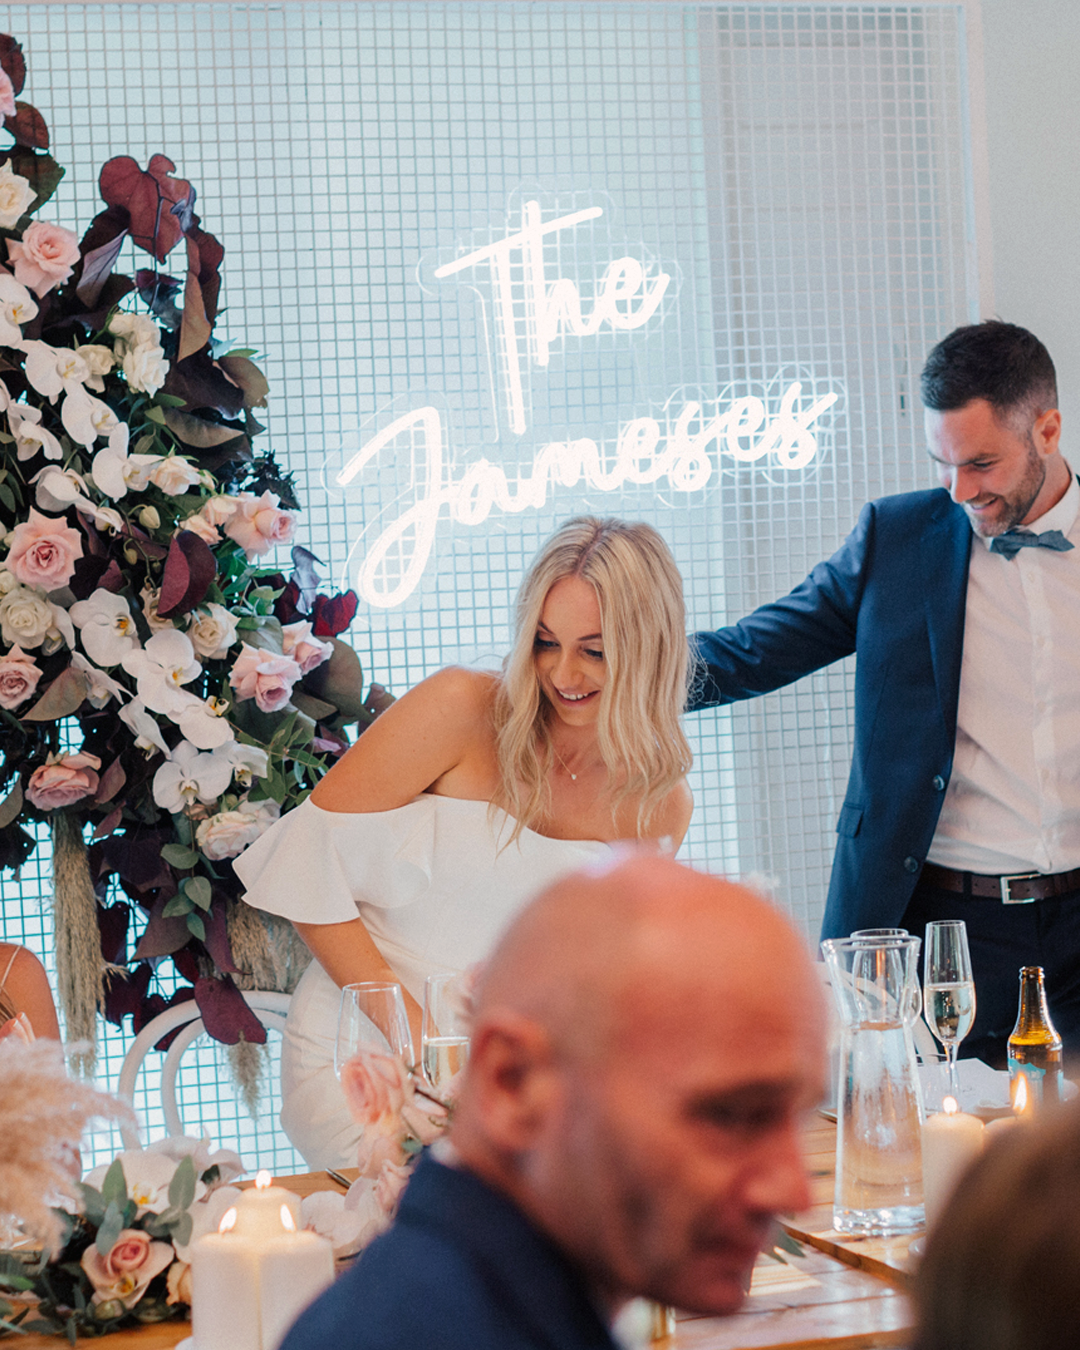 personalized neon sign saying ‘The Jameses’